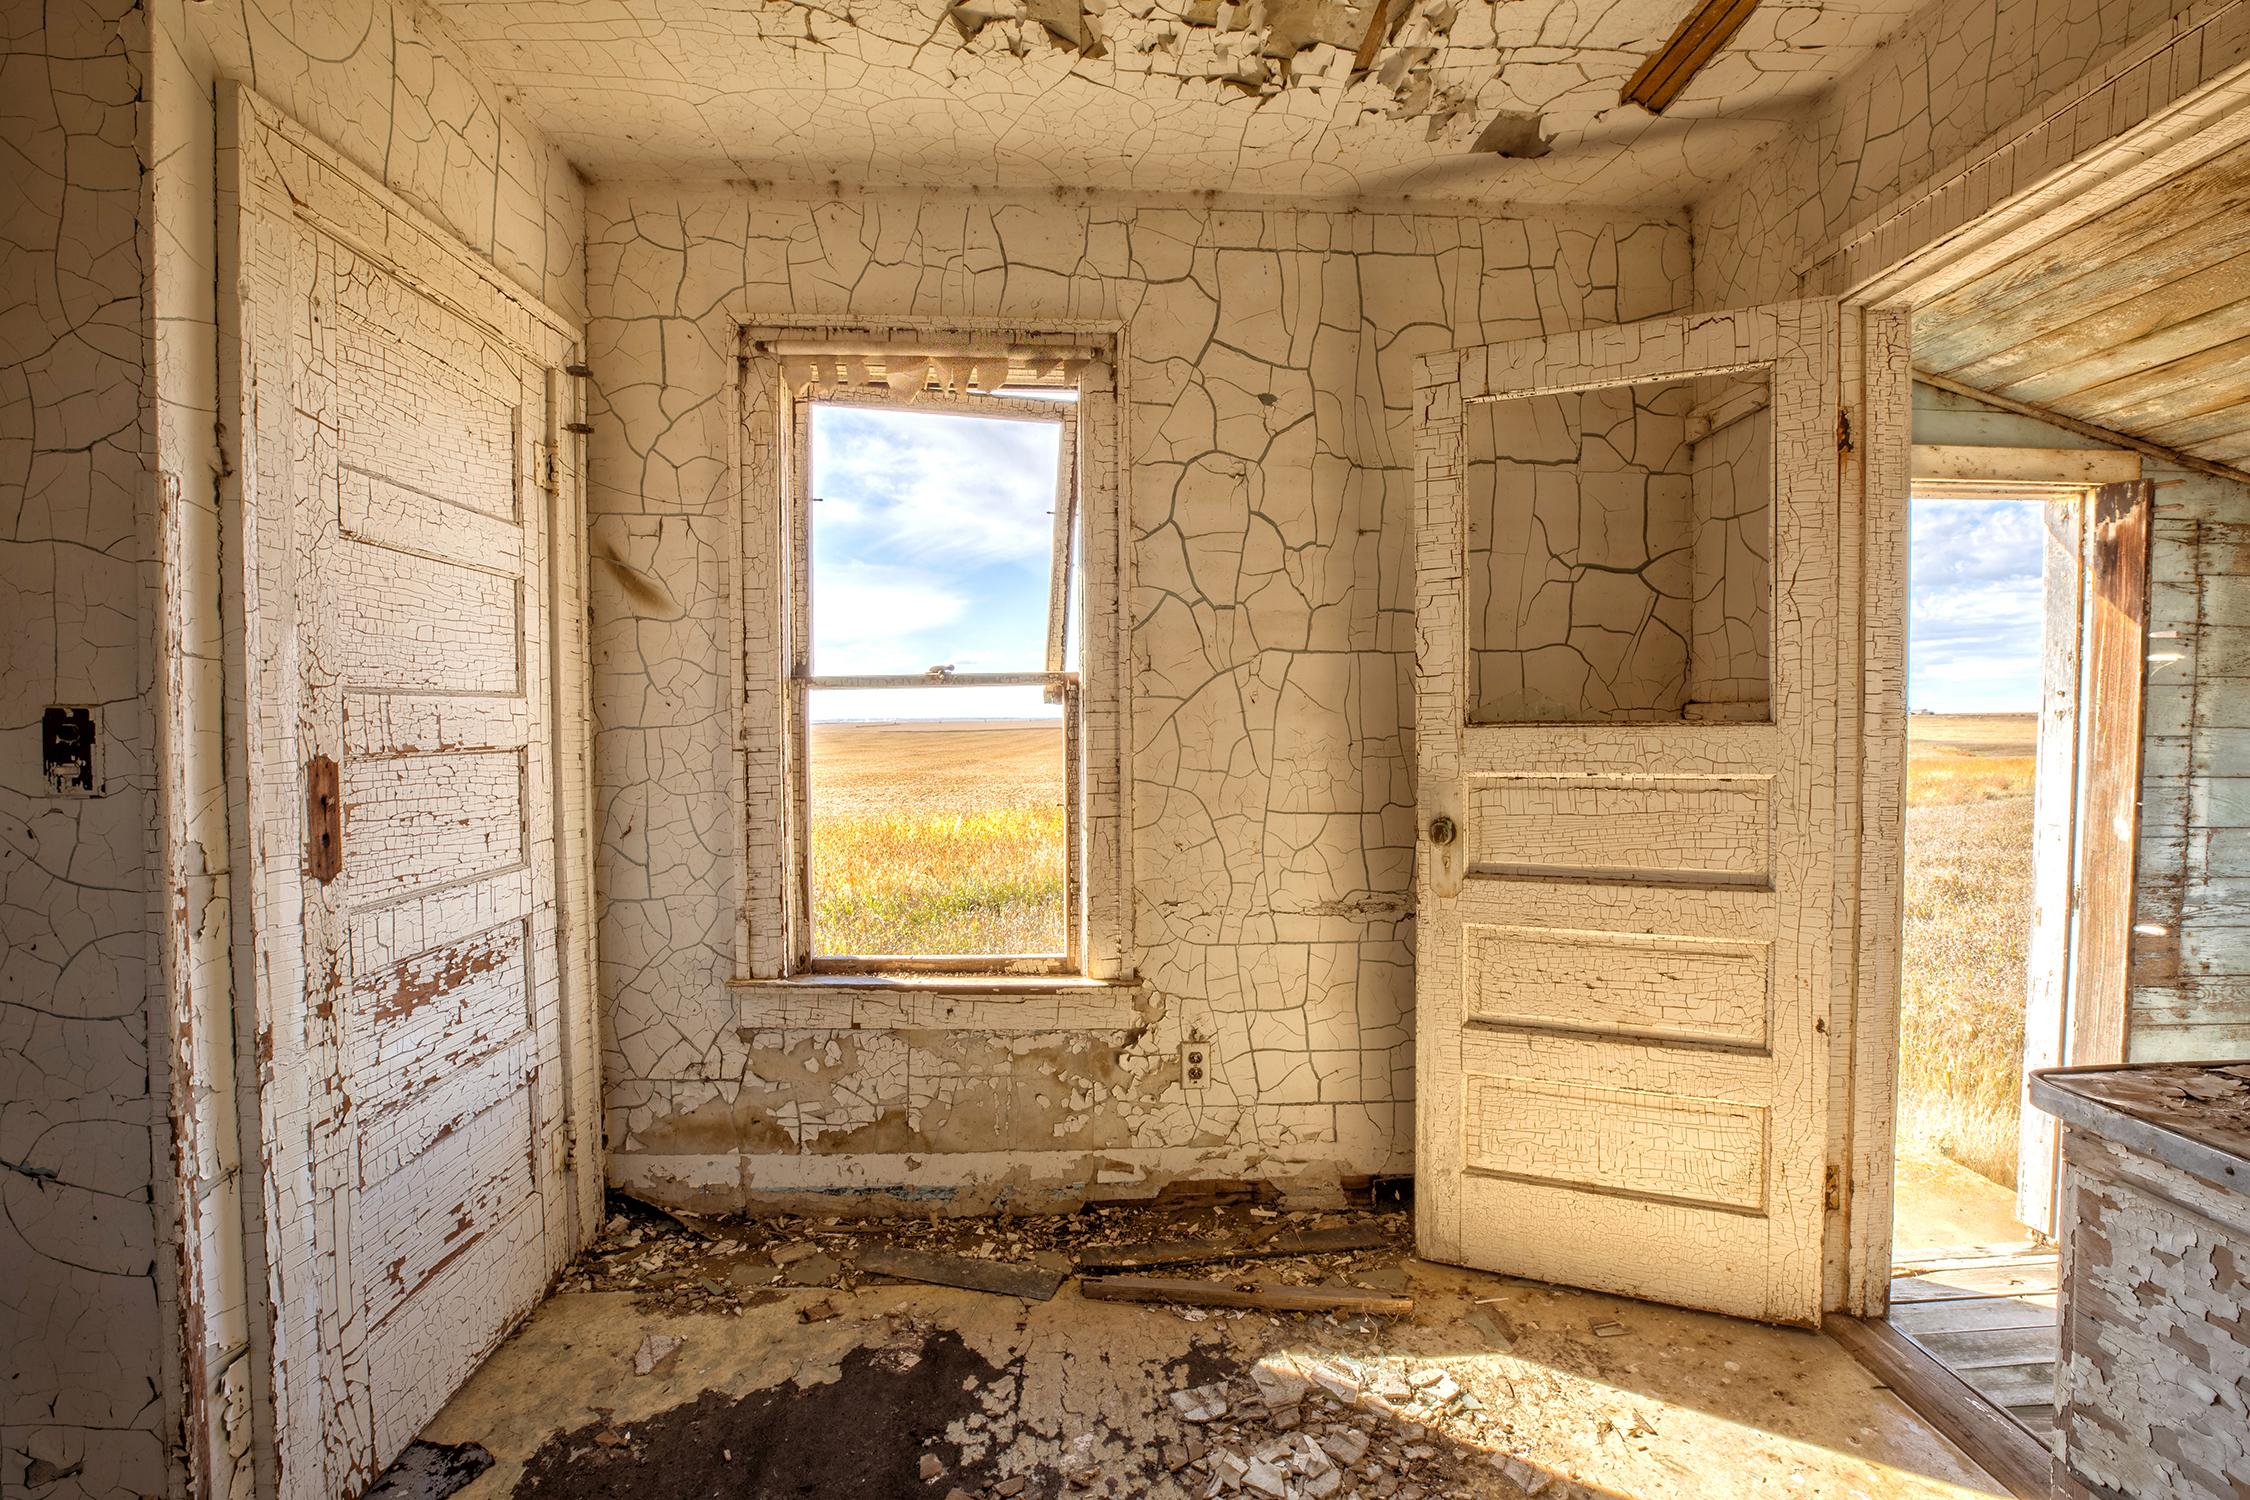 Rebecca Skinner Still-Life Photograph - "Interior III", contemporary, window, abandoned, doors, white, color photograph